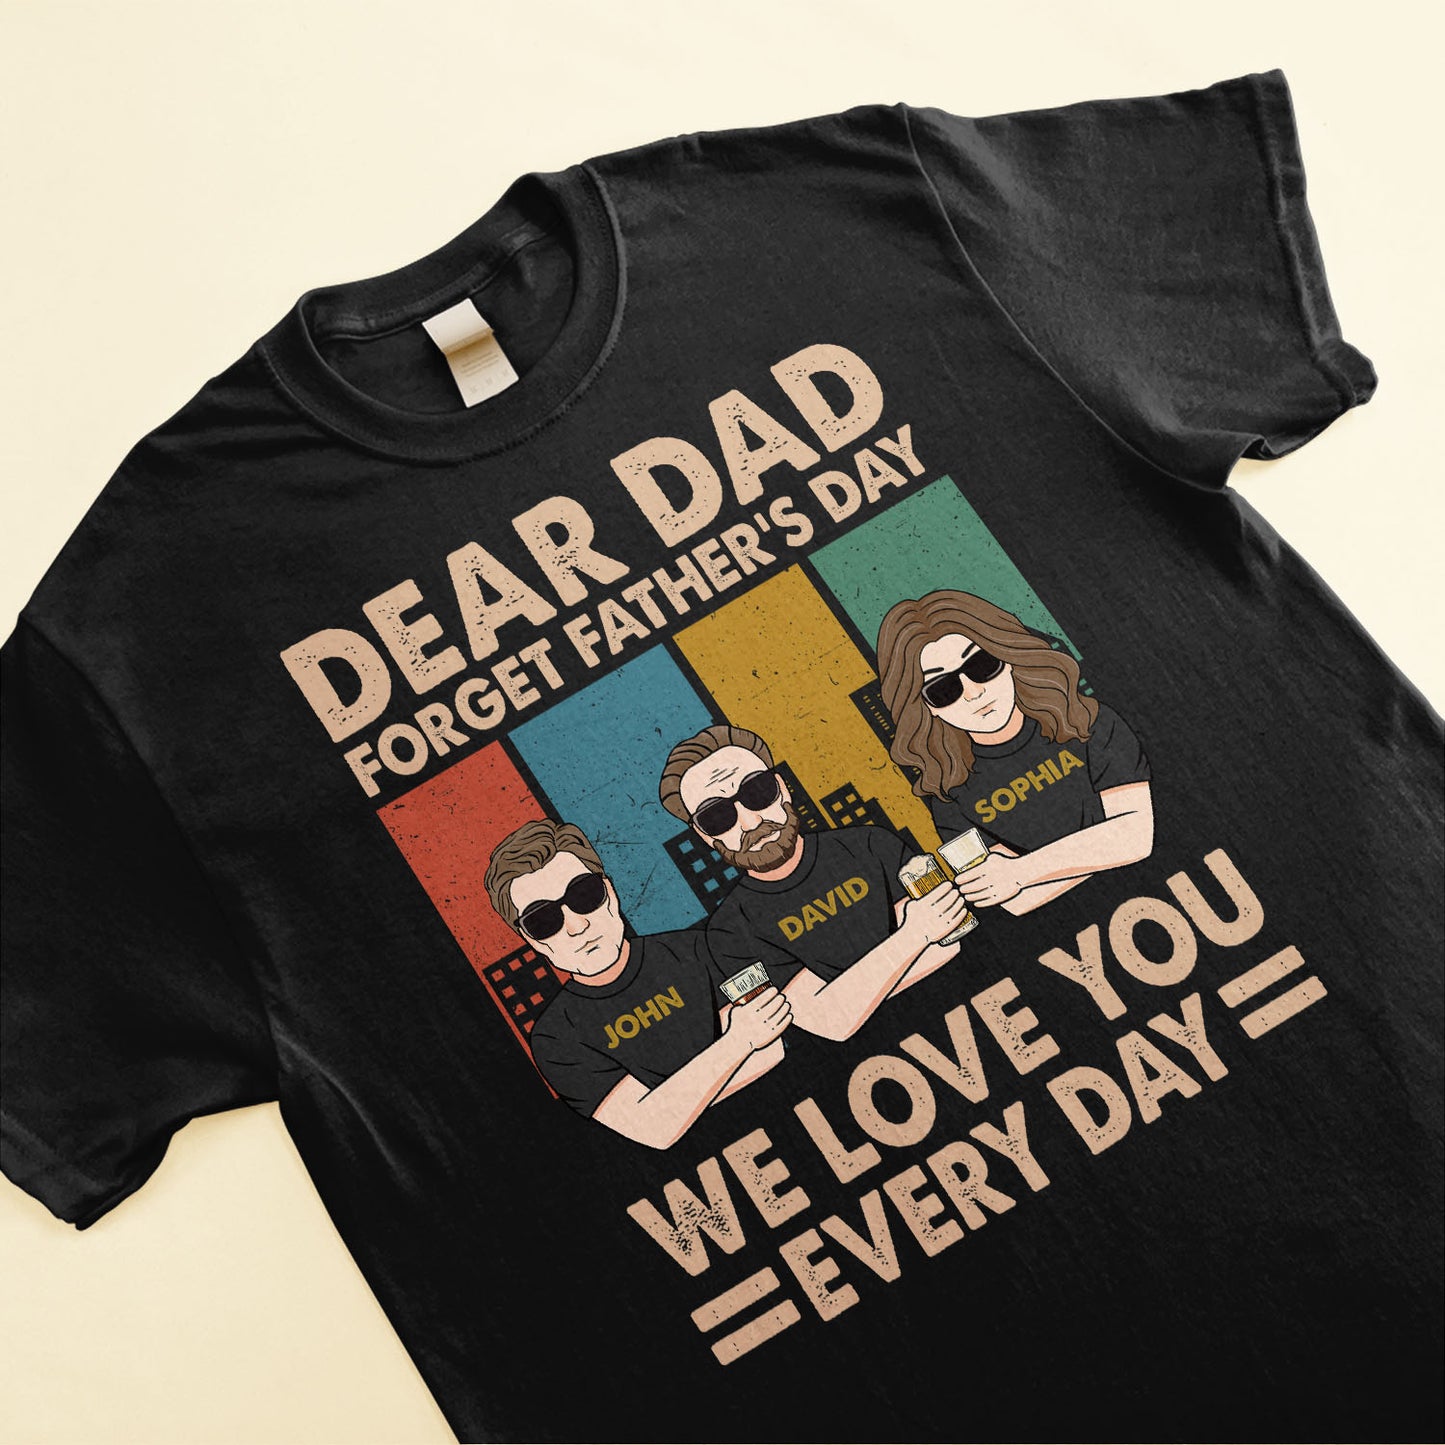 Dear Dad Forget Father's Day We Love You Everyday - Personalized Shirt